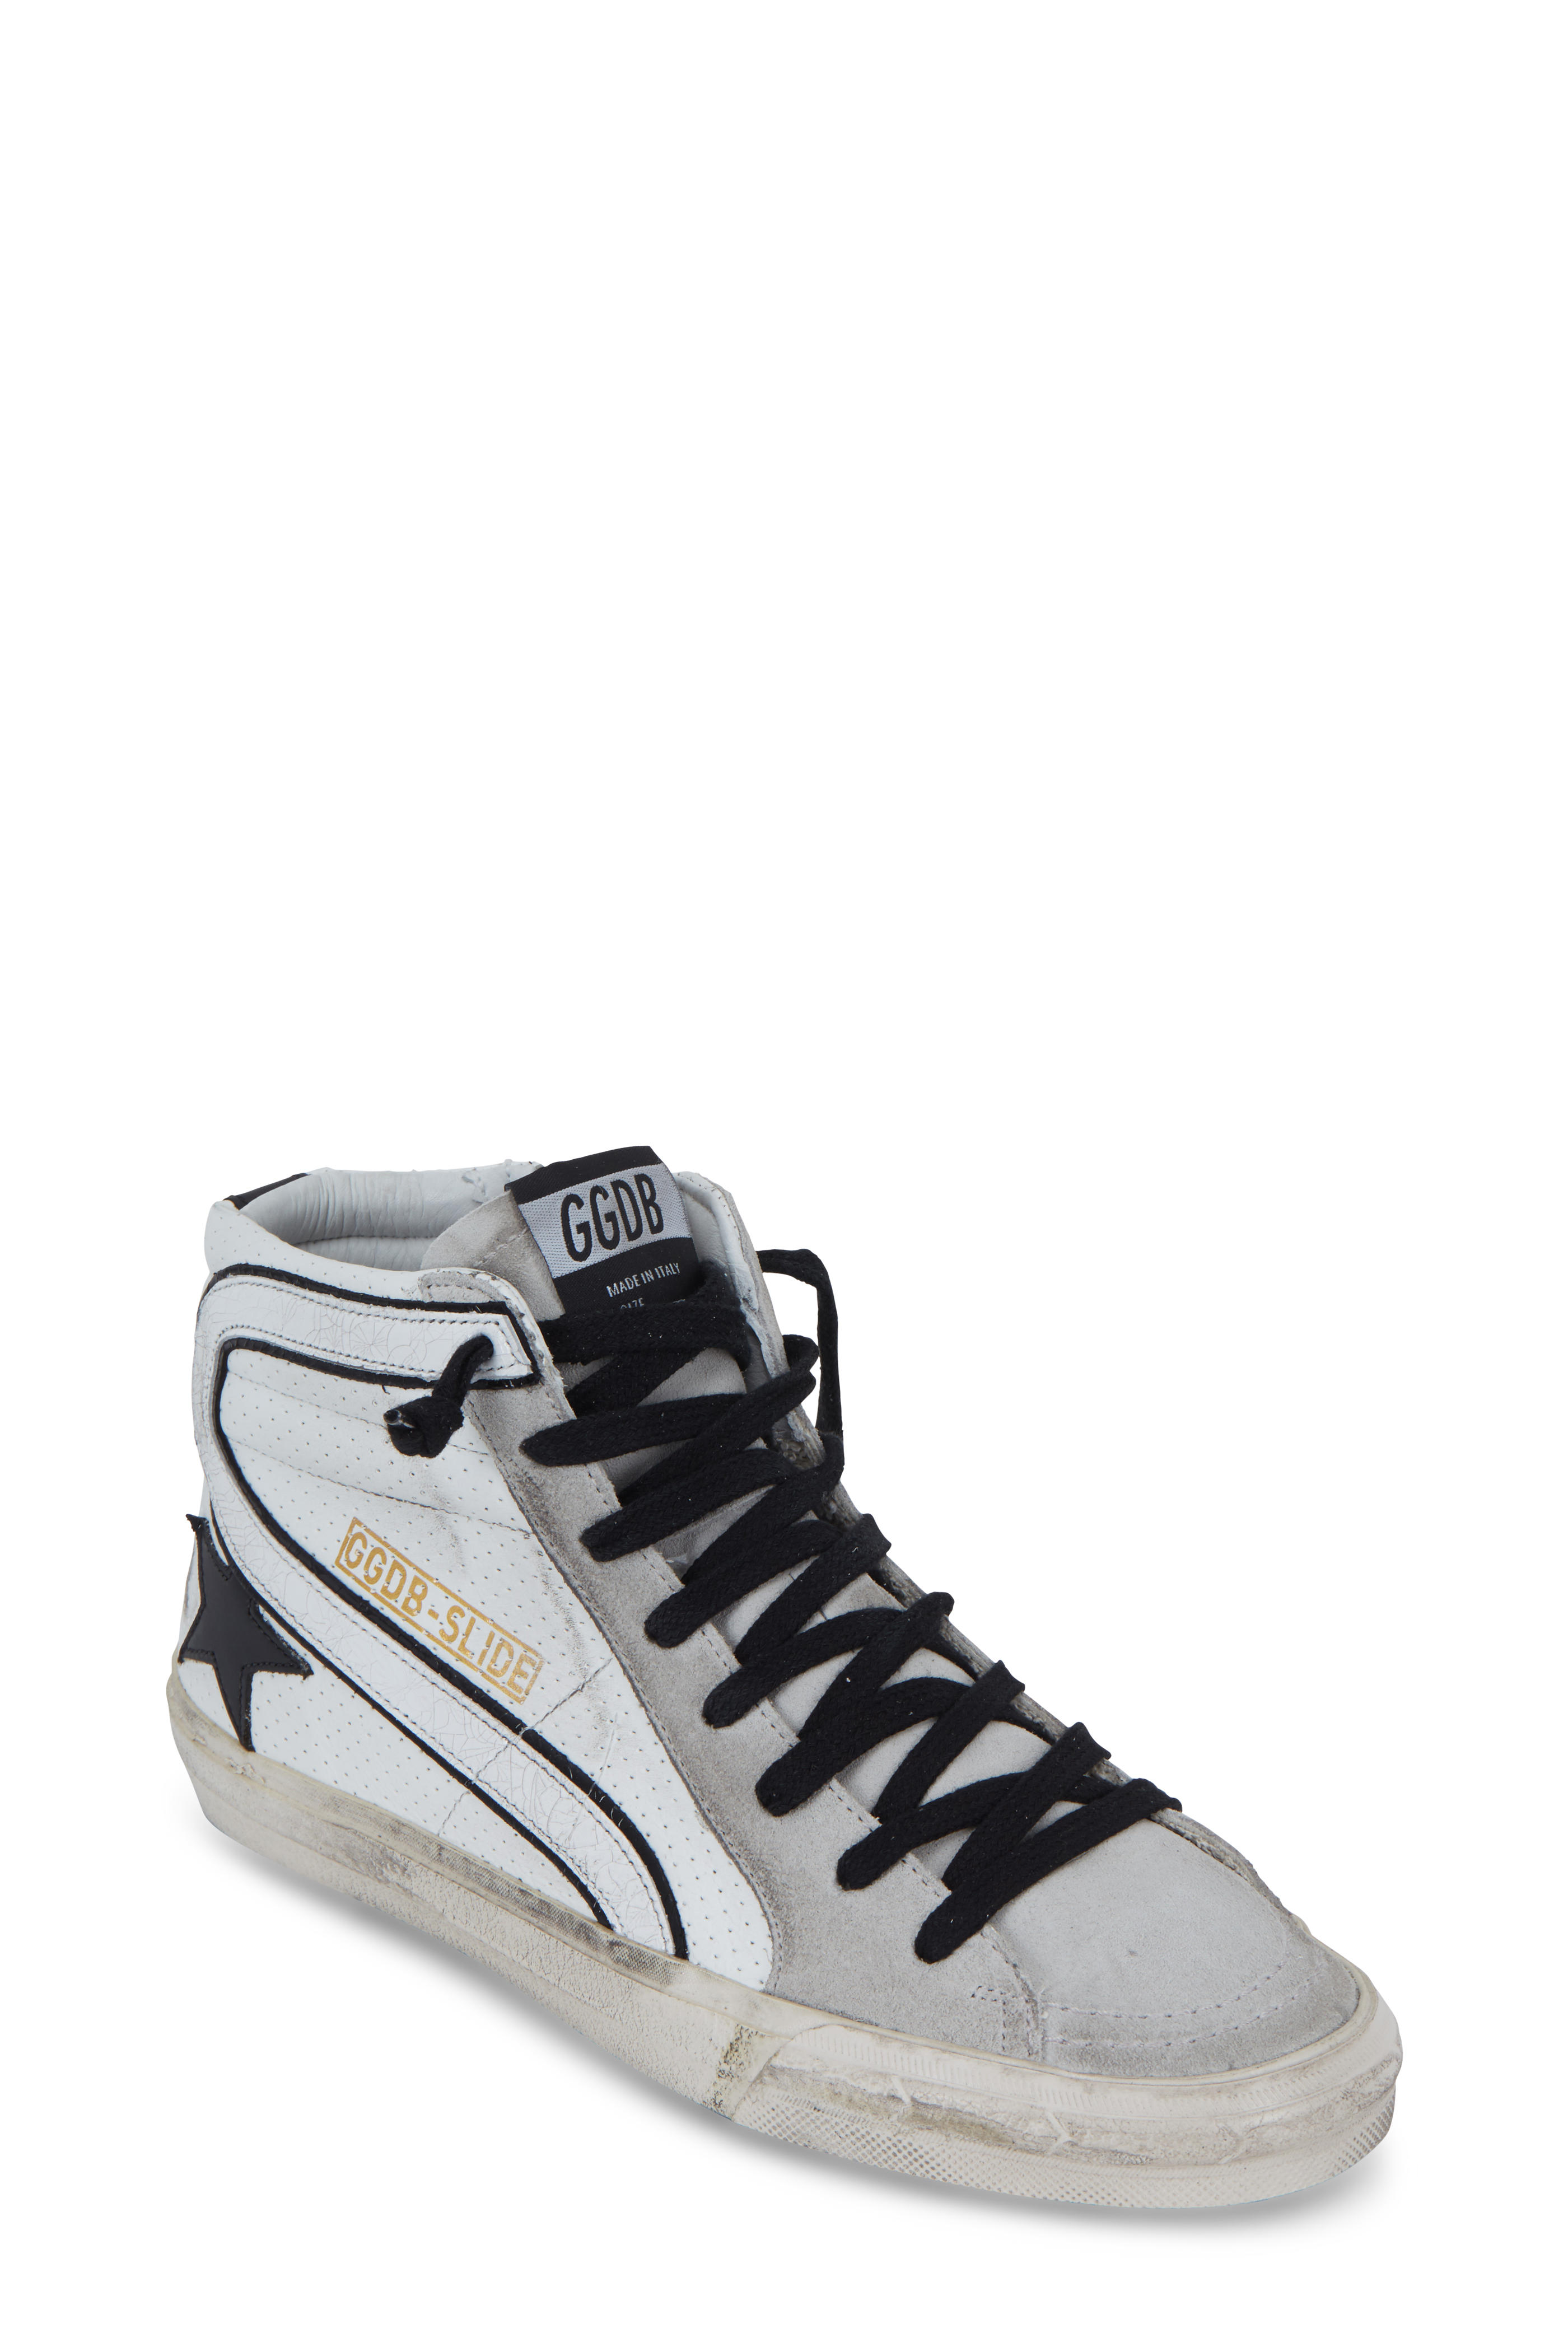 white and black golden goose sneakers